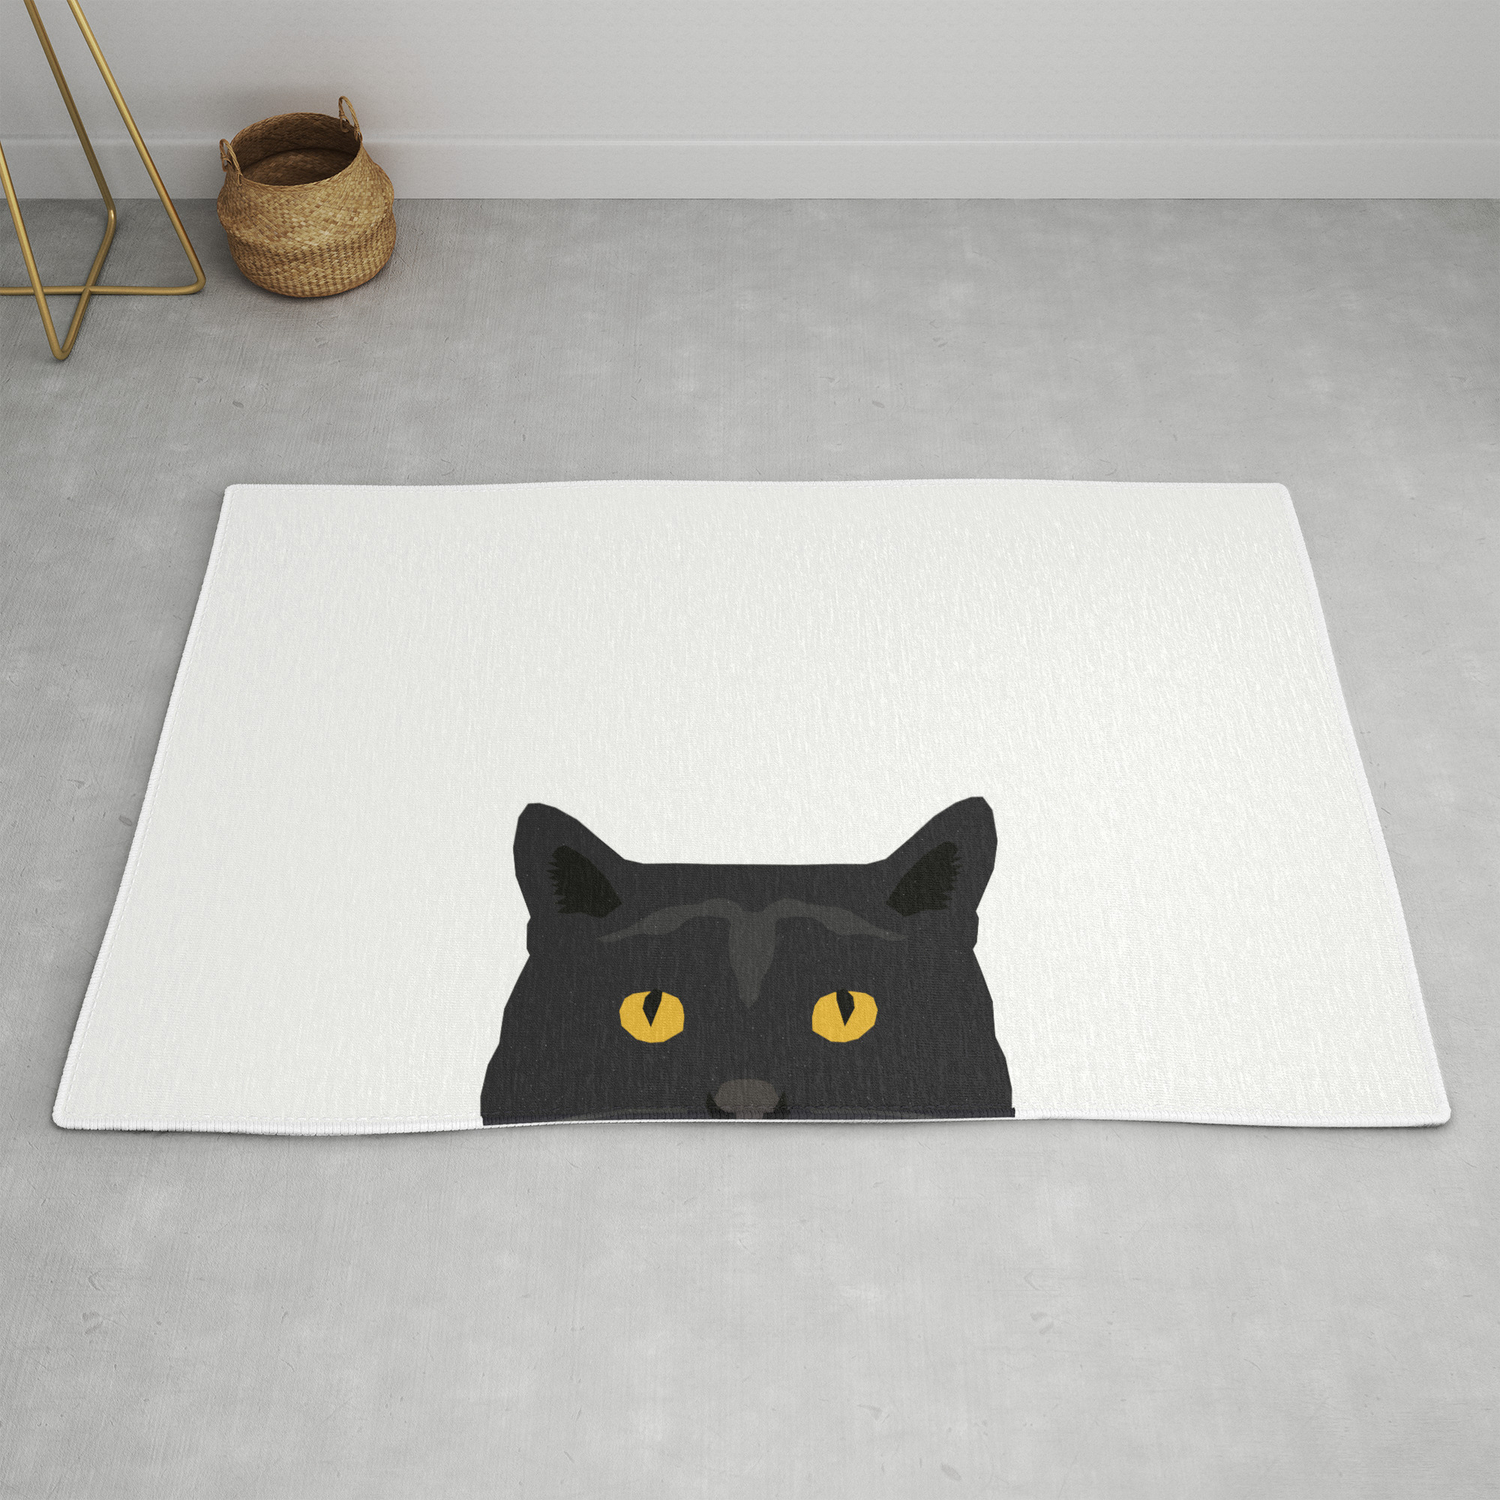 gifts for black cat lovers